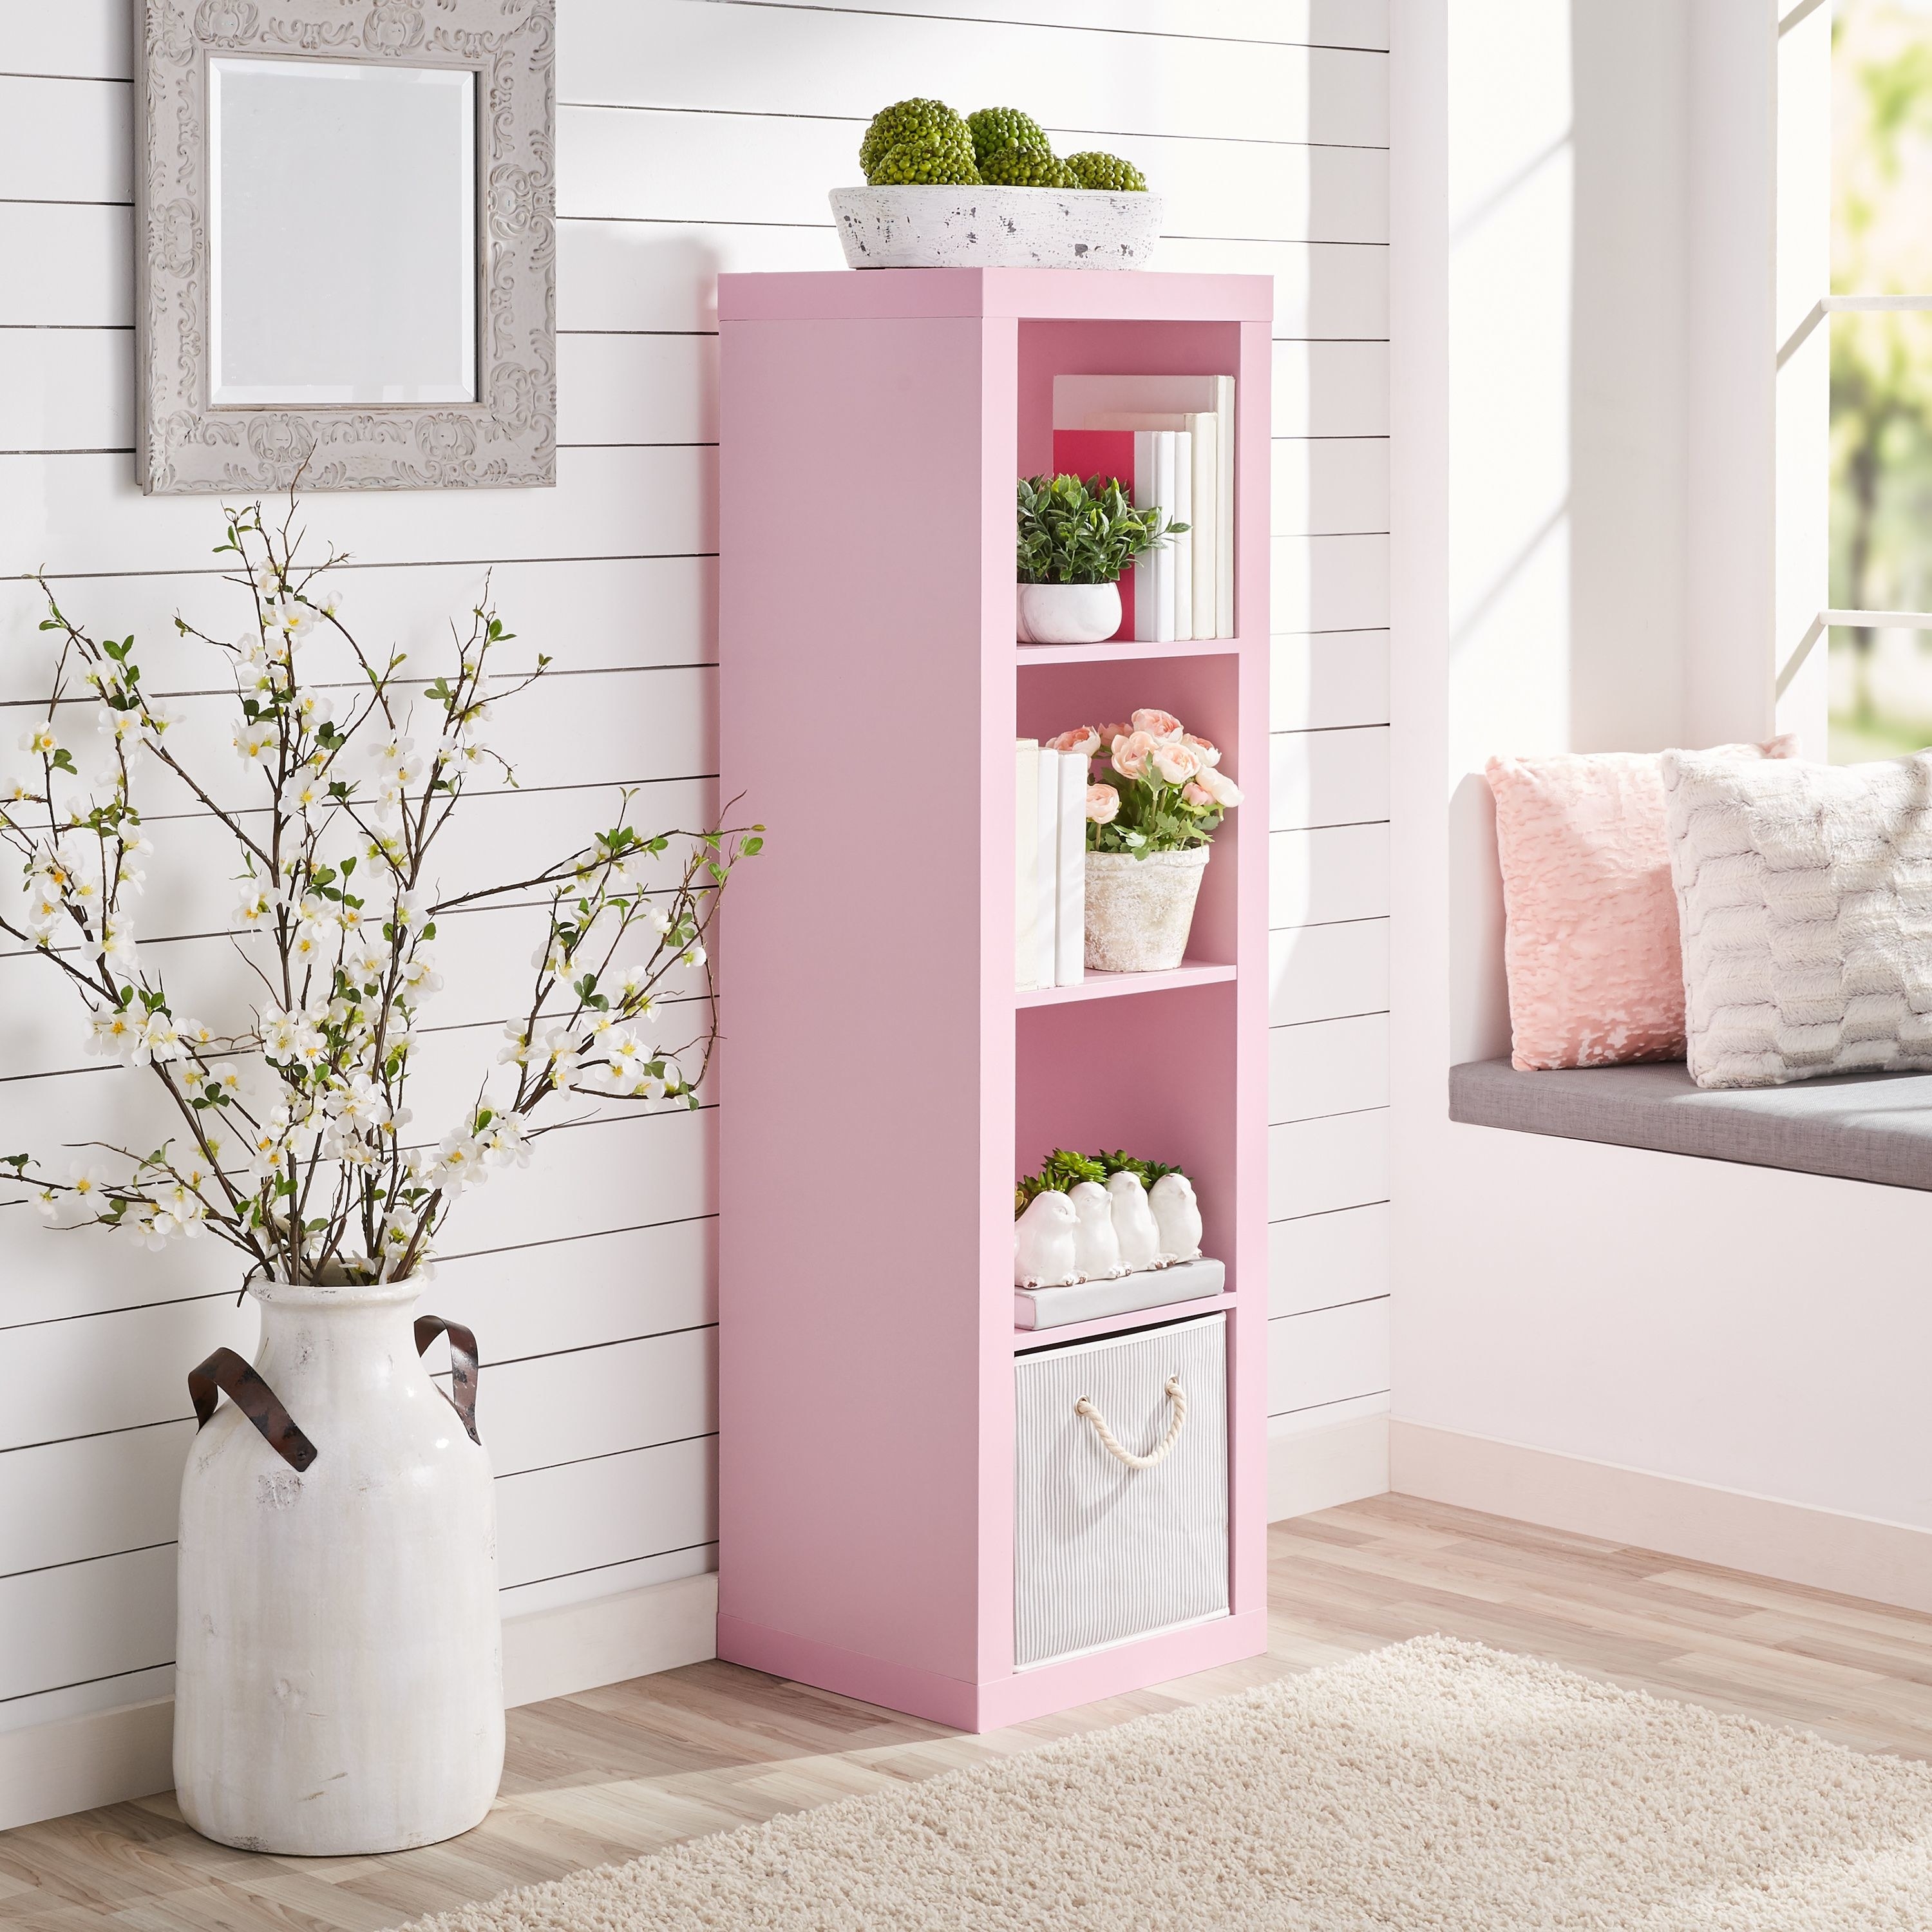 The shelving unit in pink, which has four compartments 